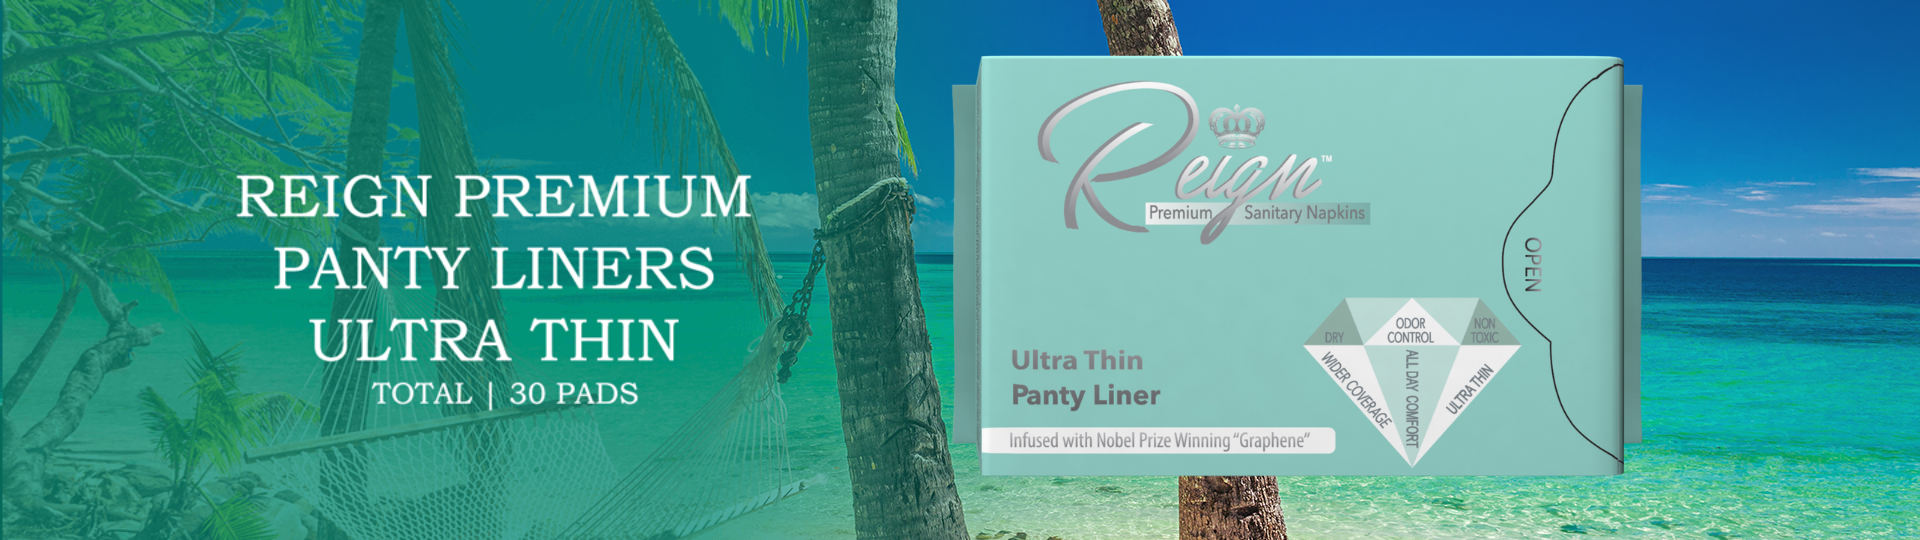 reign-pads-panty-liners-beach-header-1920x540-2